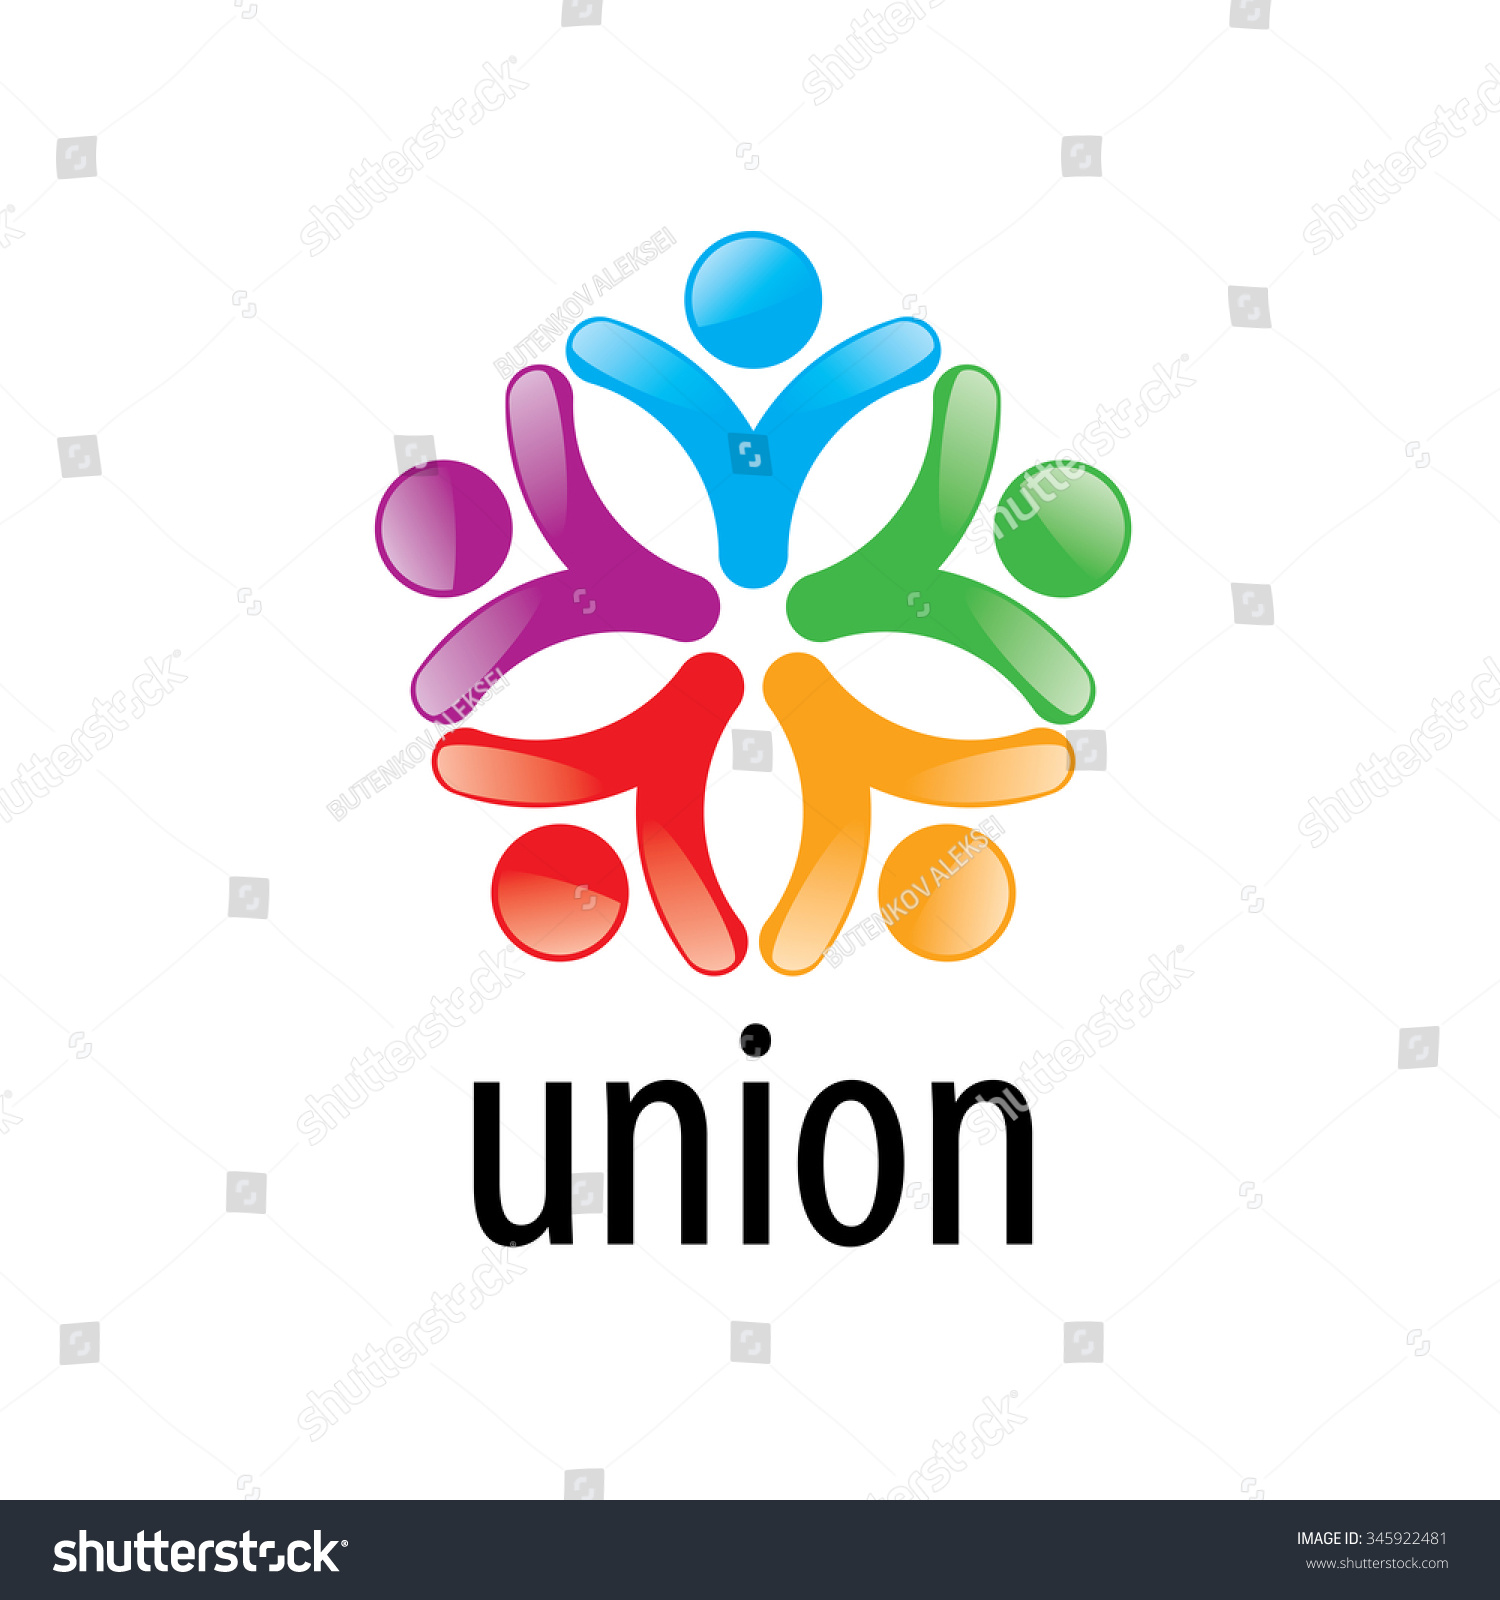 Abstract Vector Logo Colored People Union Stock Vector 345922481 ...